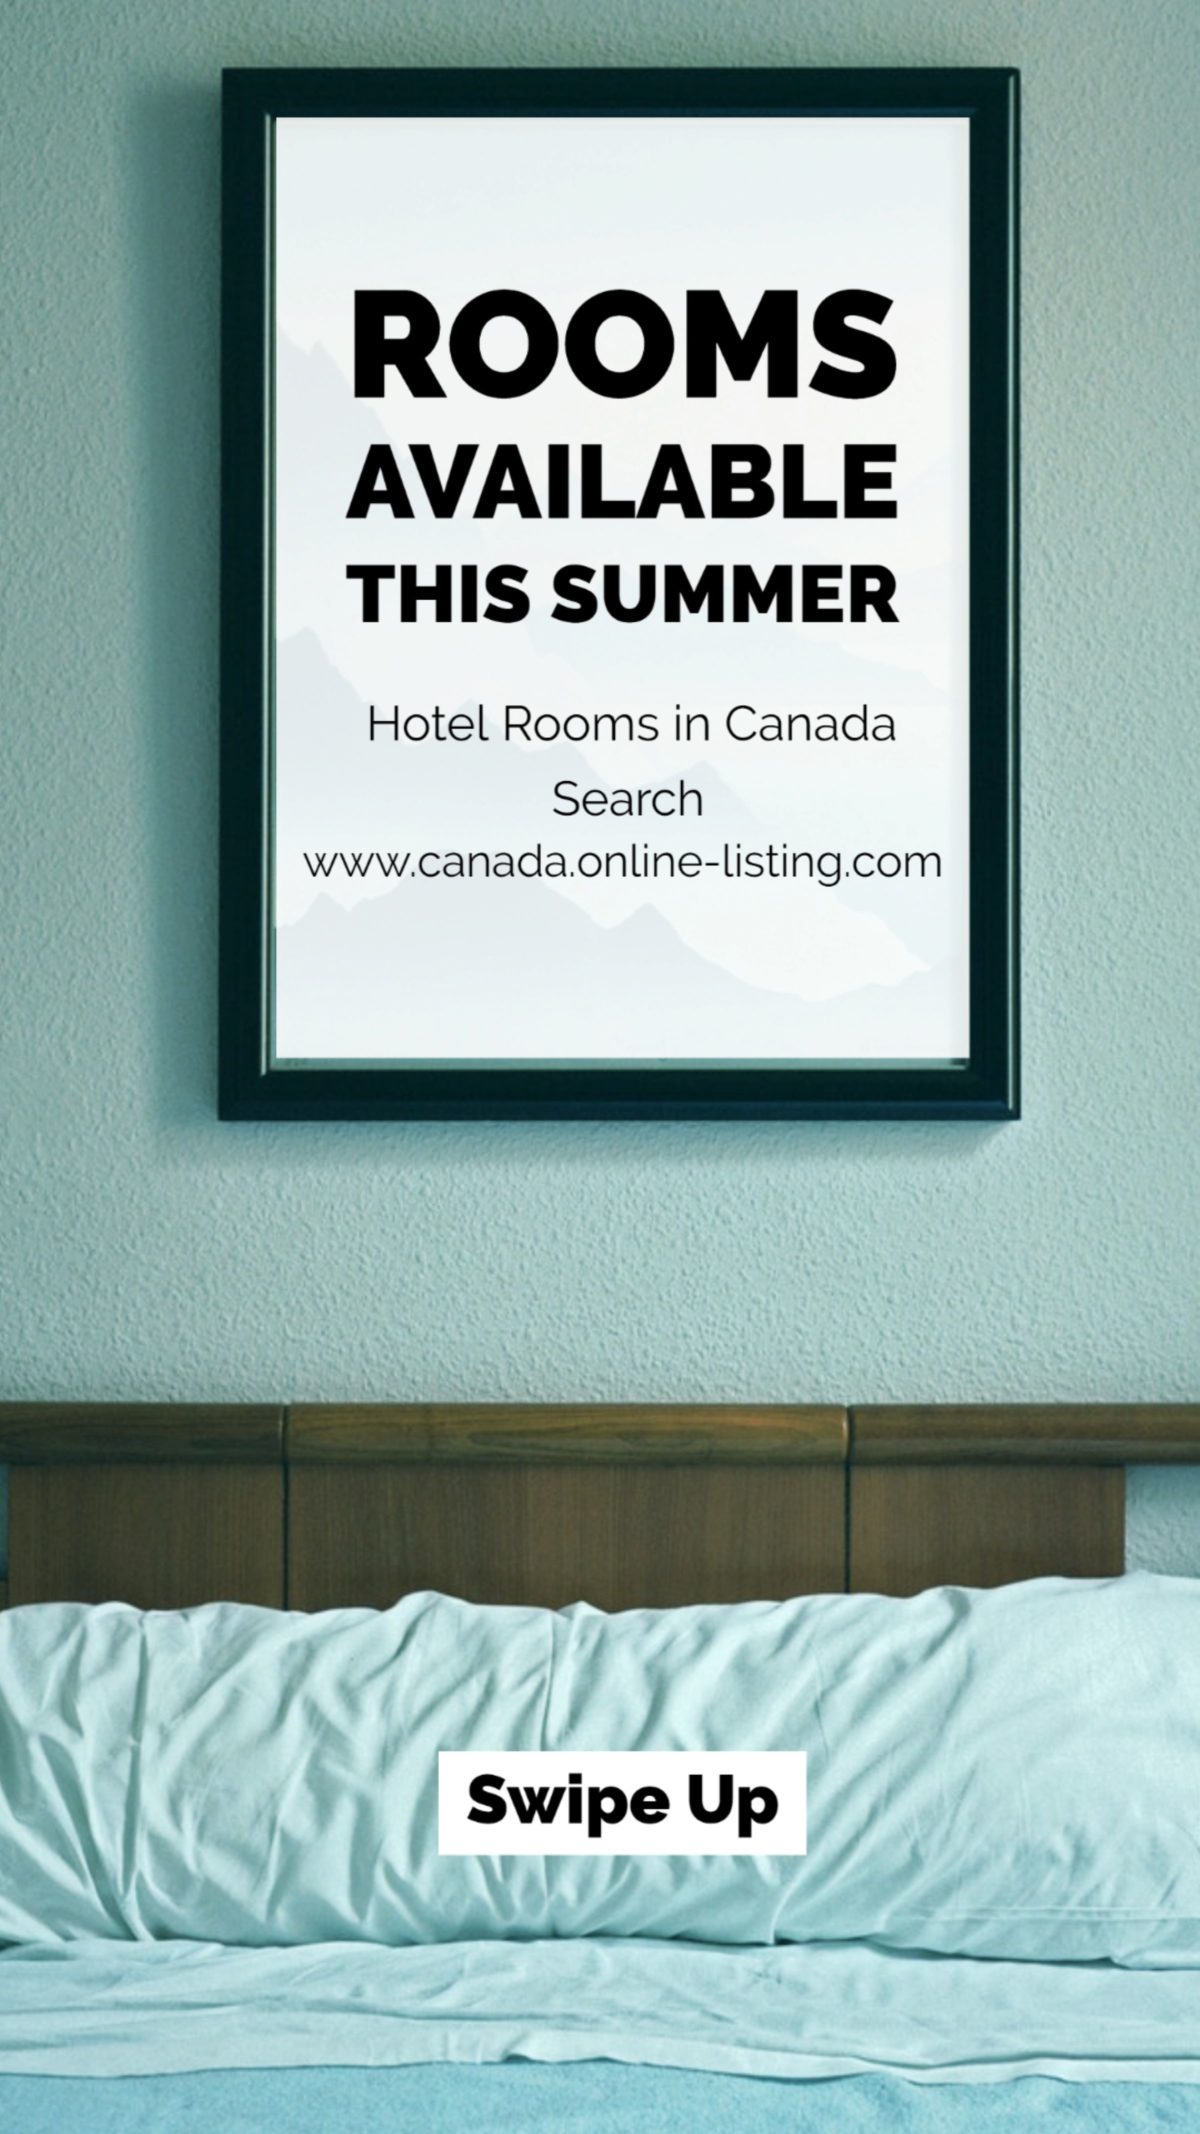 Hotel Rooms in Canada